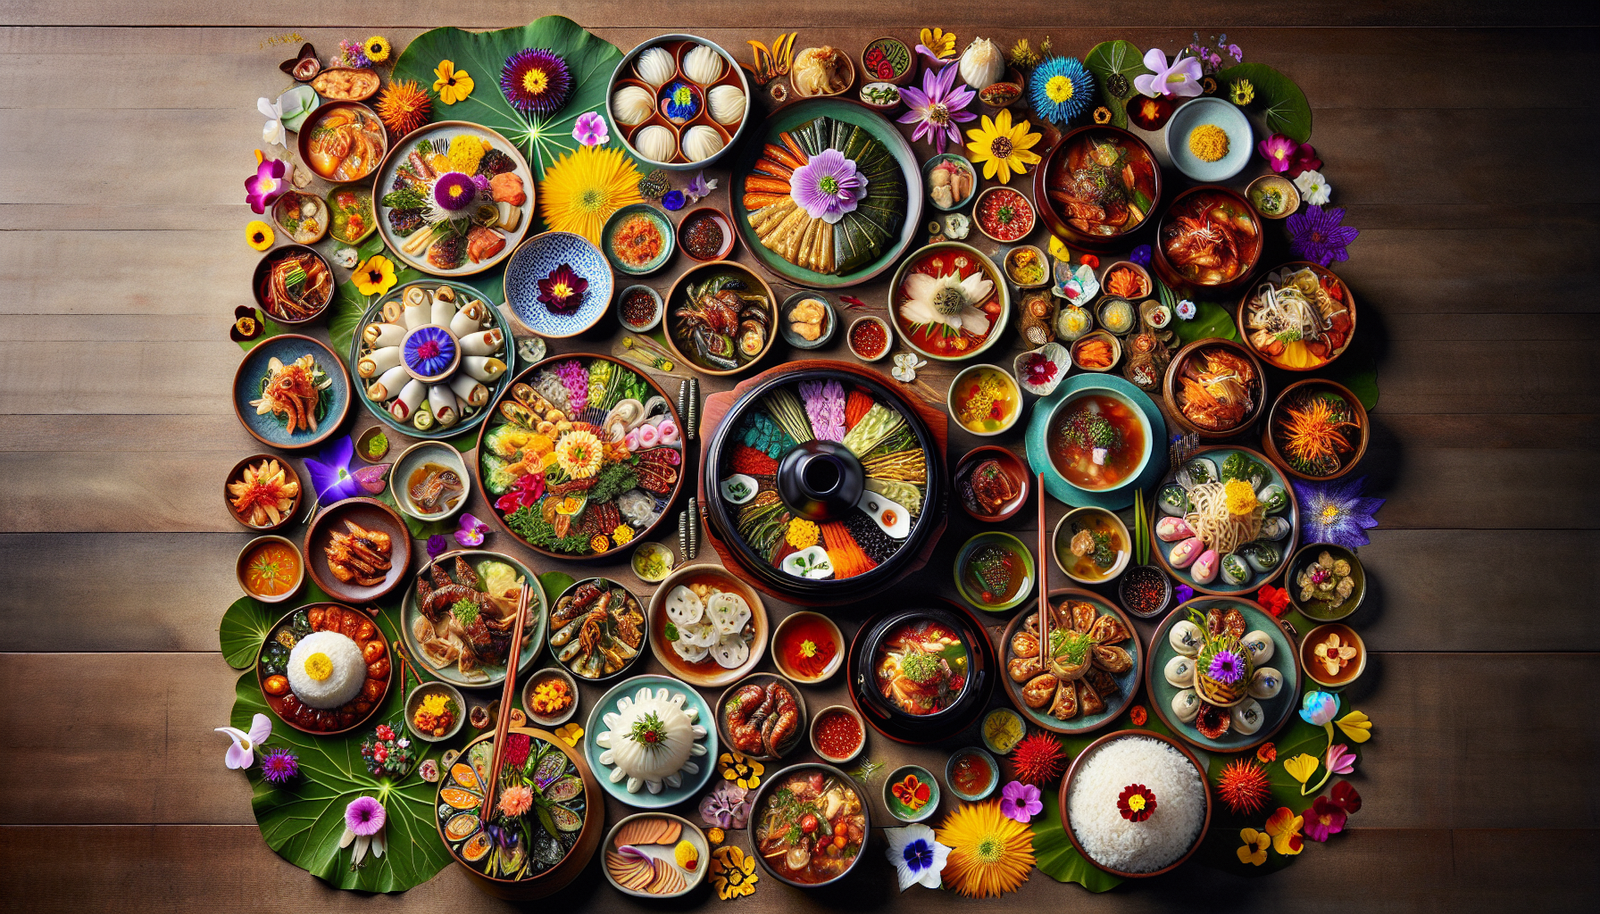 What Are The Latest Trends In Incorporating Edible Flowers Into Korean Dishes?